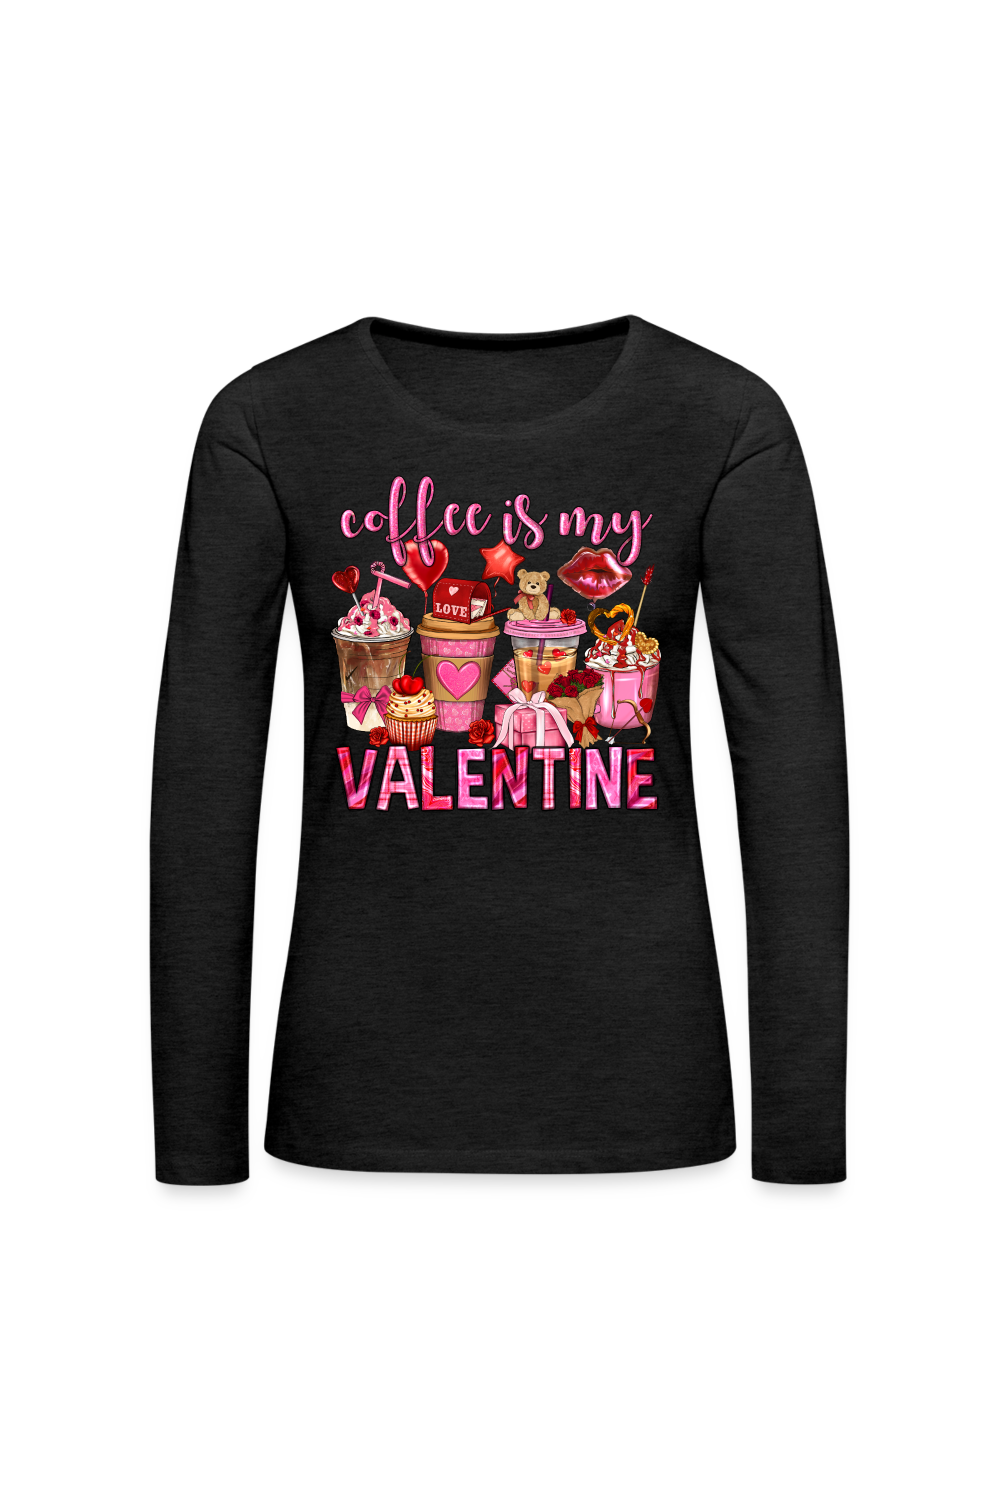 Women'sValentine's Day Coffee is my Valentine Long Sleeve T-Shirt - charcoal grey